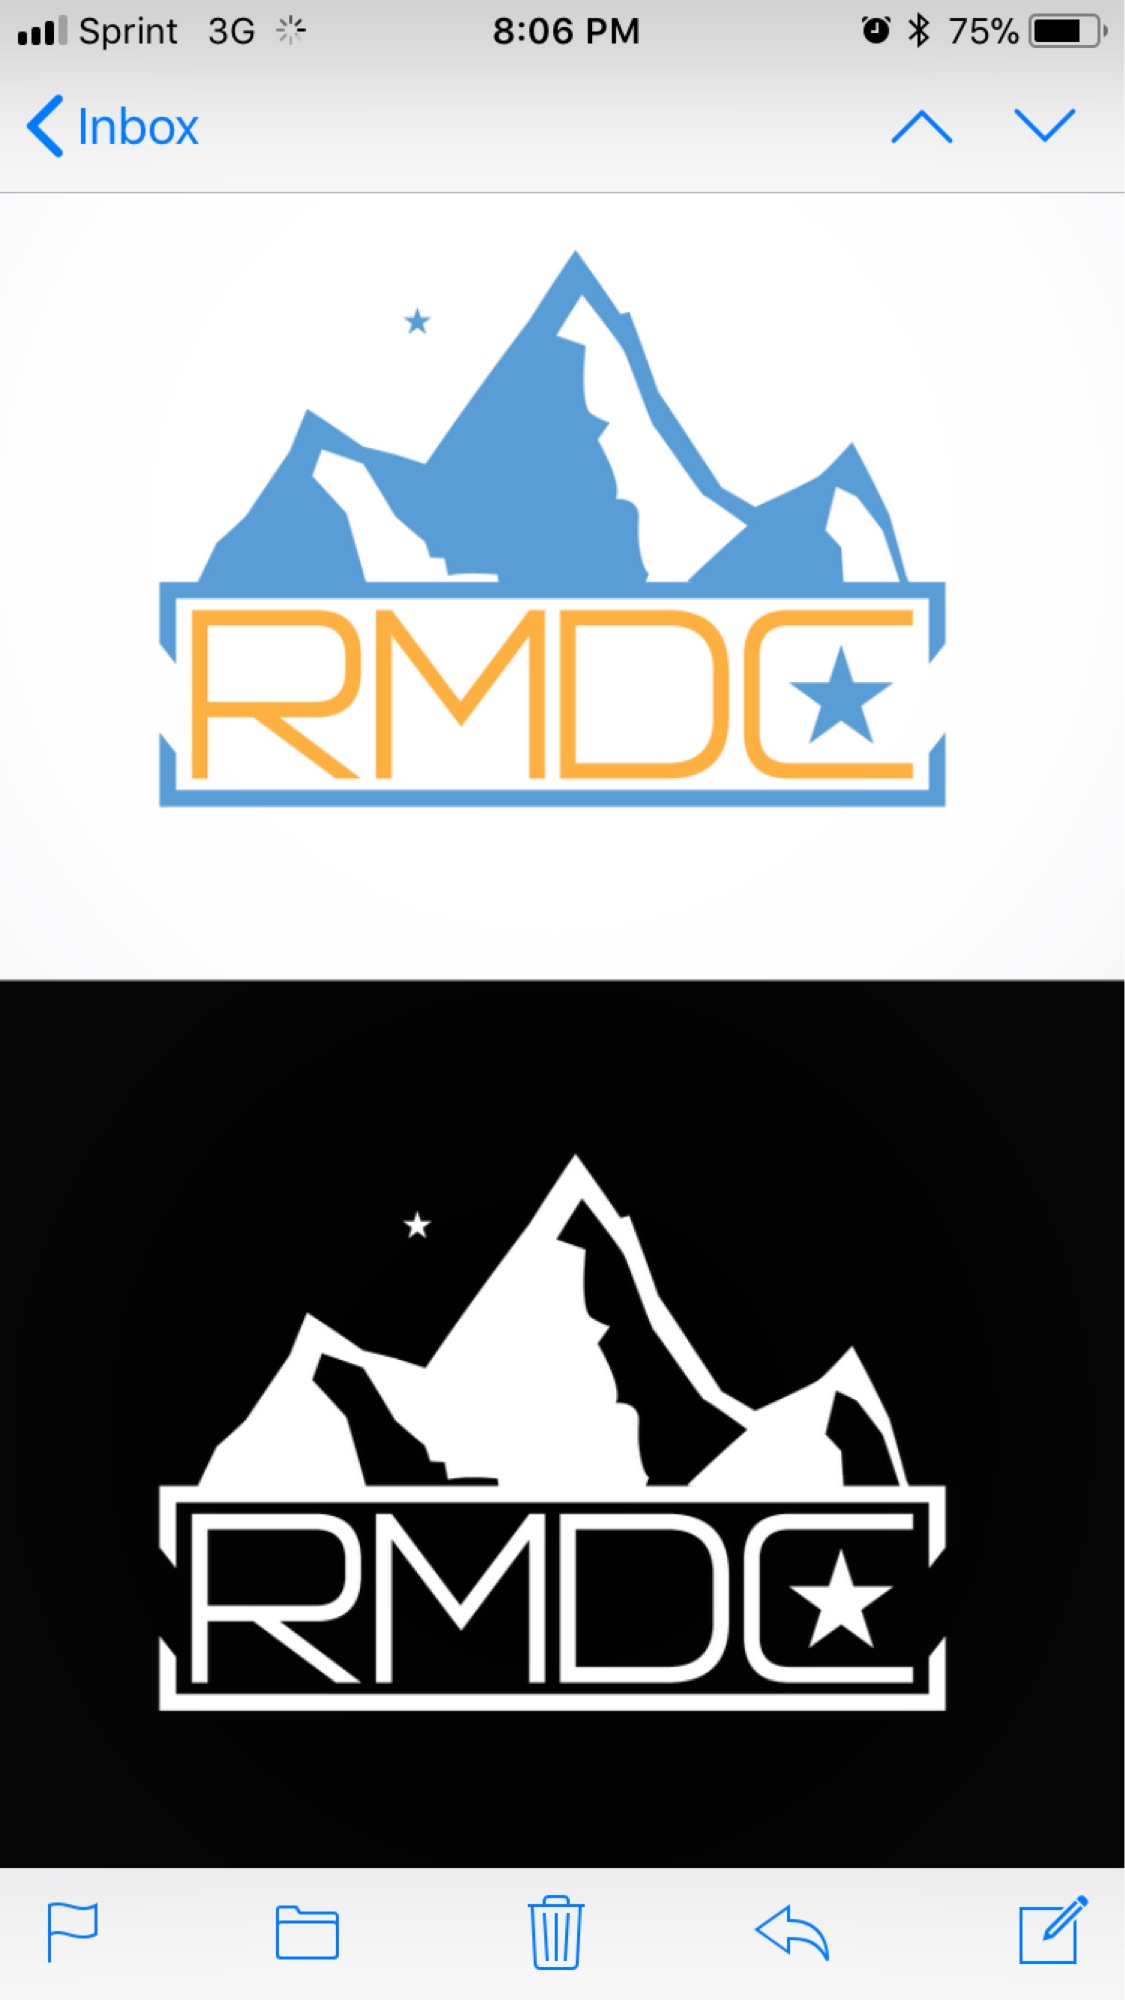 Rocky Mountain Duct Cleaning Logo